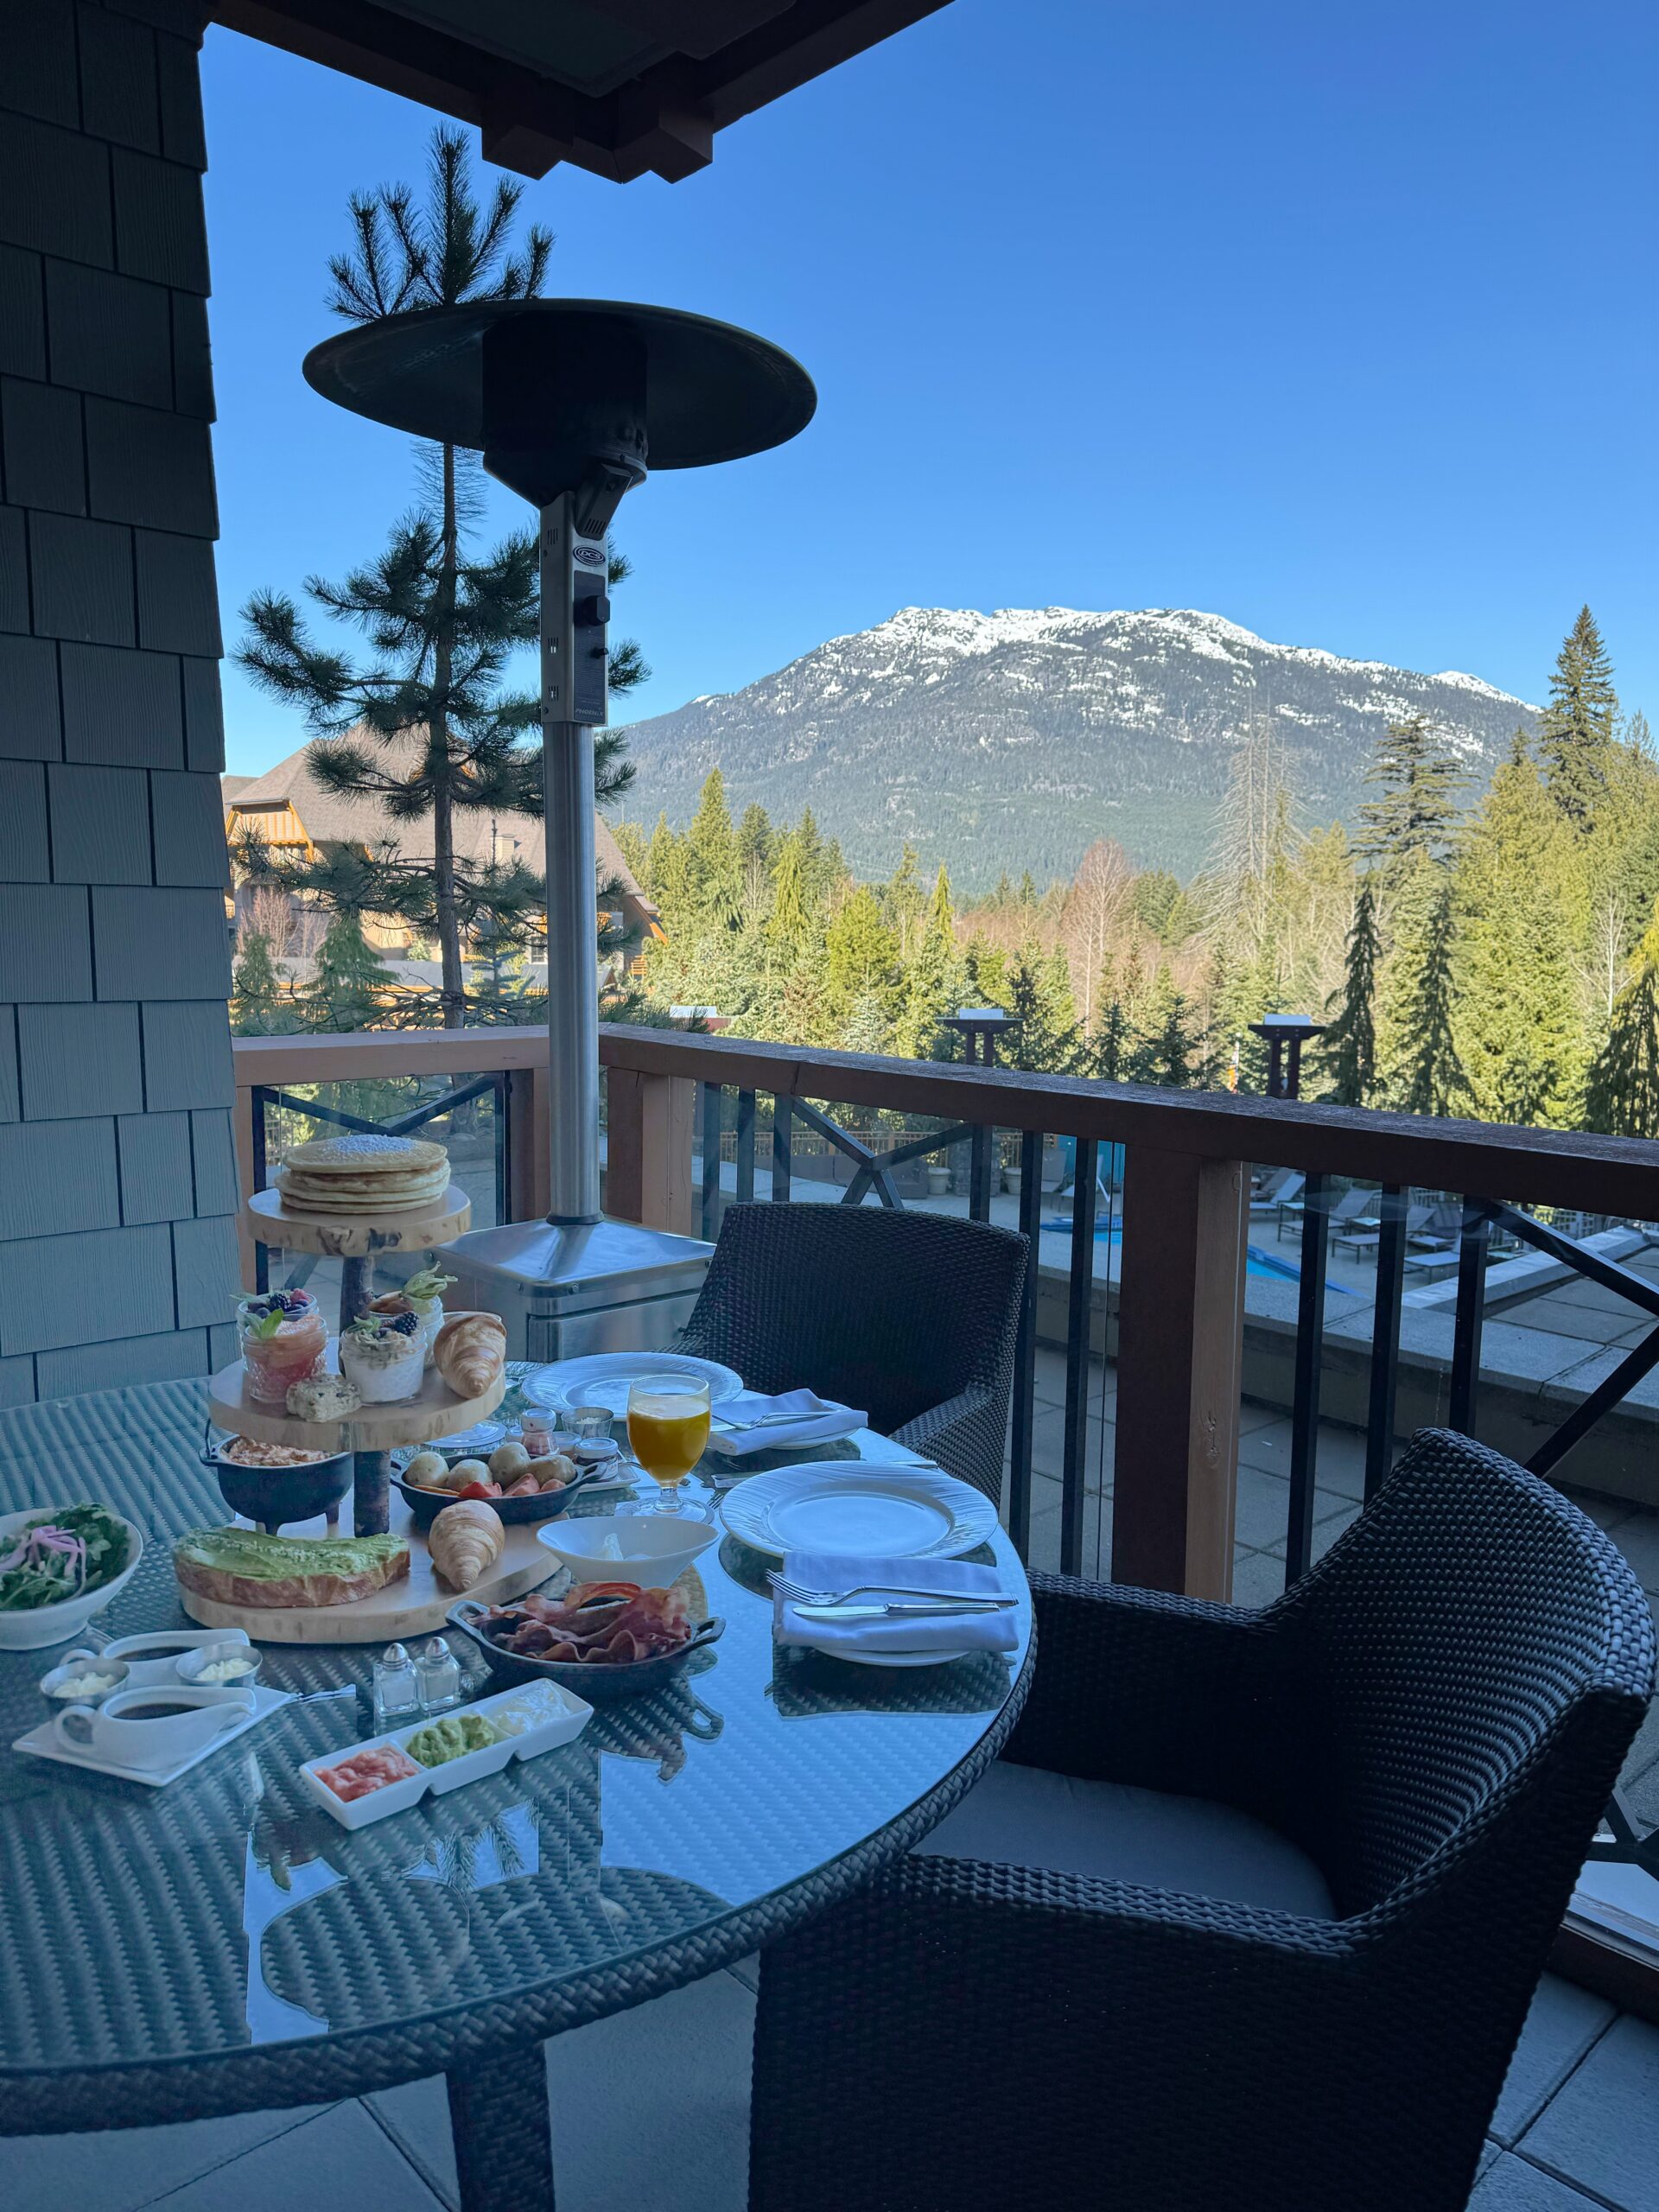 Four Seasons Resort & Residences – Where to Stay in Whistler